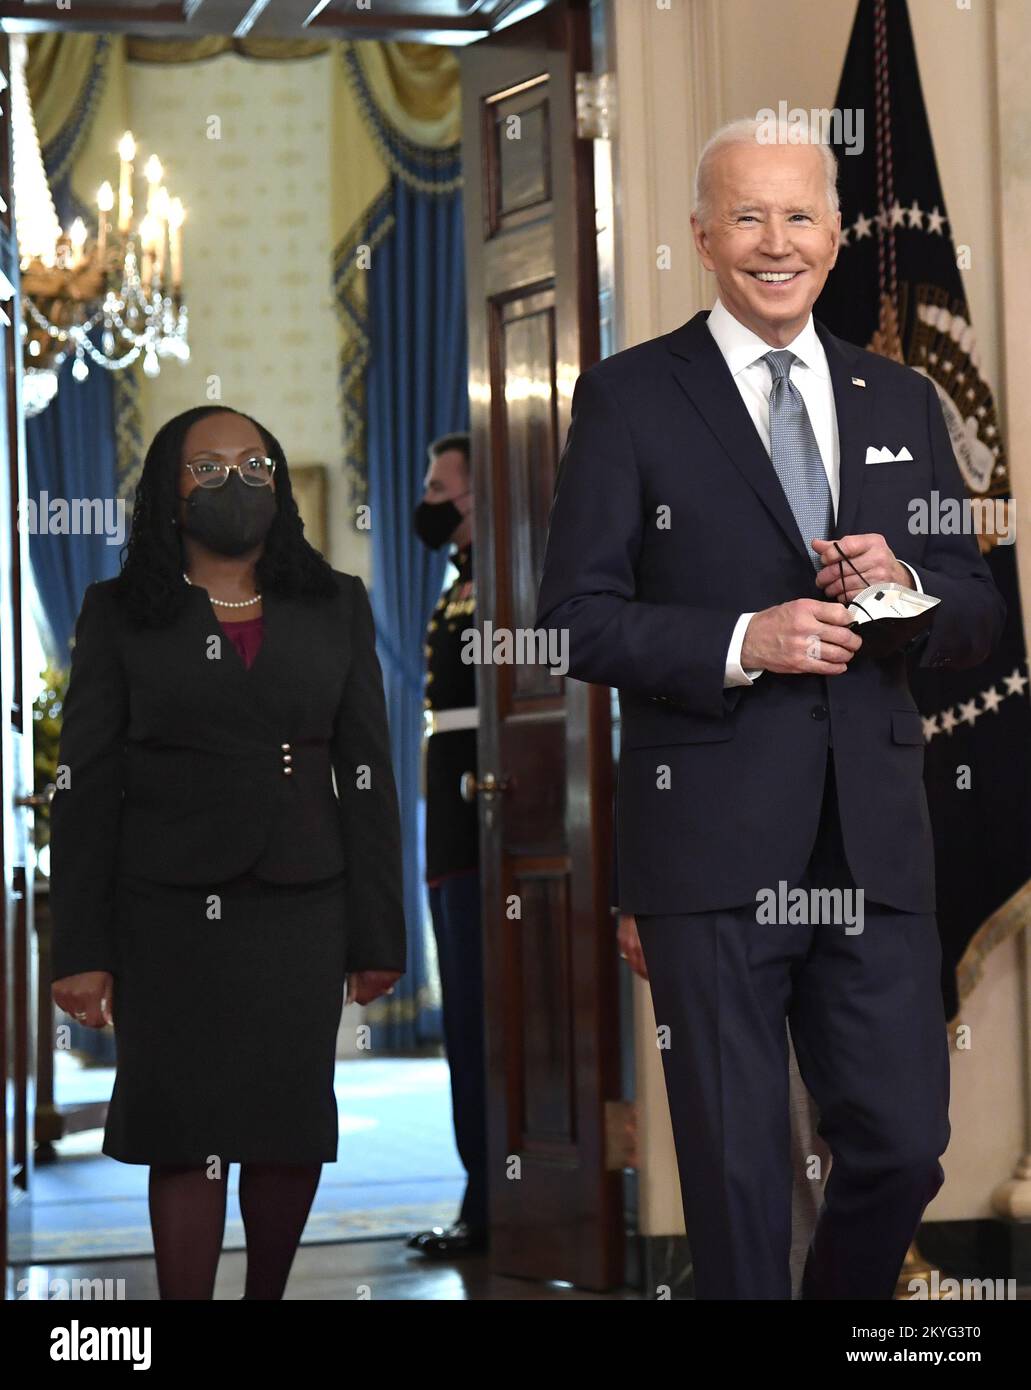 Washington, United States. 25th Feb, 2022. President Joe Biden (R) escorts Judge Ketanji Brown Jackson, his nominee for the Supreme Court, to announce his decision, on Friday, February 25, 2022, at the White House, Washington, DC. If confirmed, Jackson would be the first Black woman to serve on the high court. Photo by Mike Theiler/UPI Credit: UPI/Alamy Live News Stock Photo